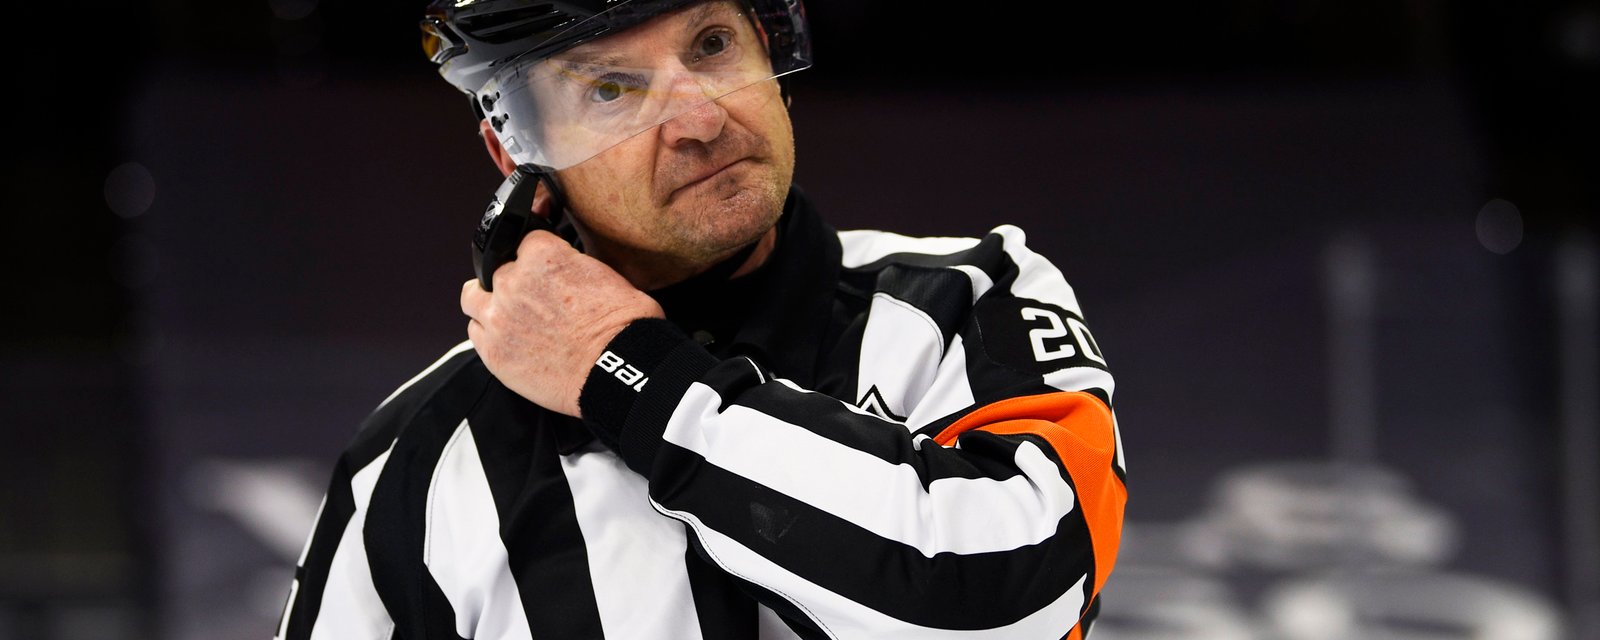 Disgraced referee Tim Peel opens up about hot mic incident that got him fired from the NHL! 